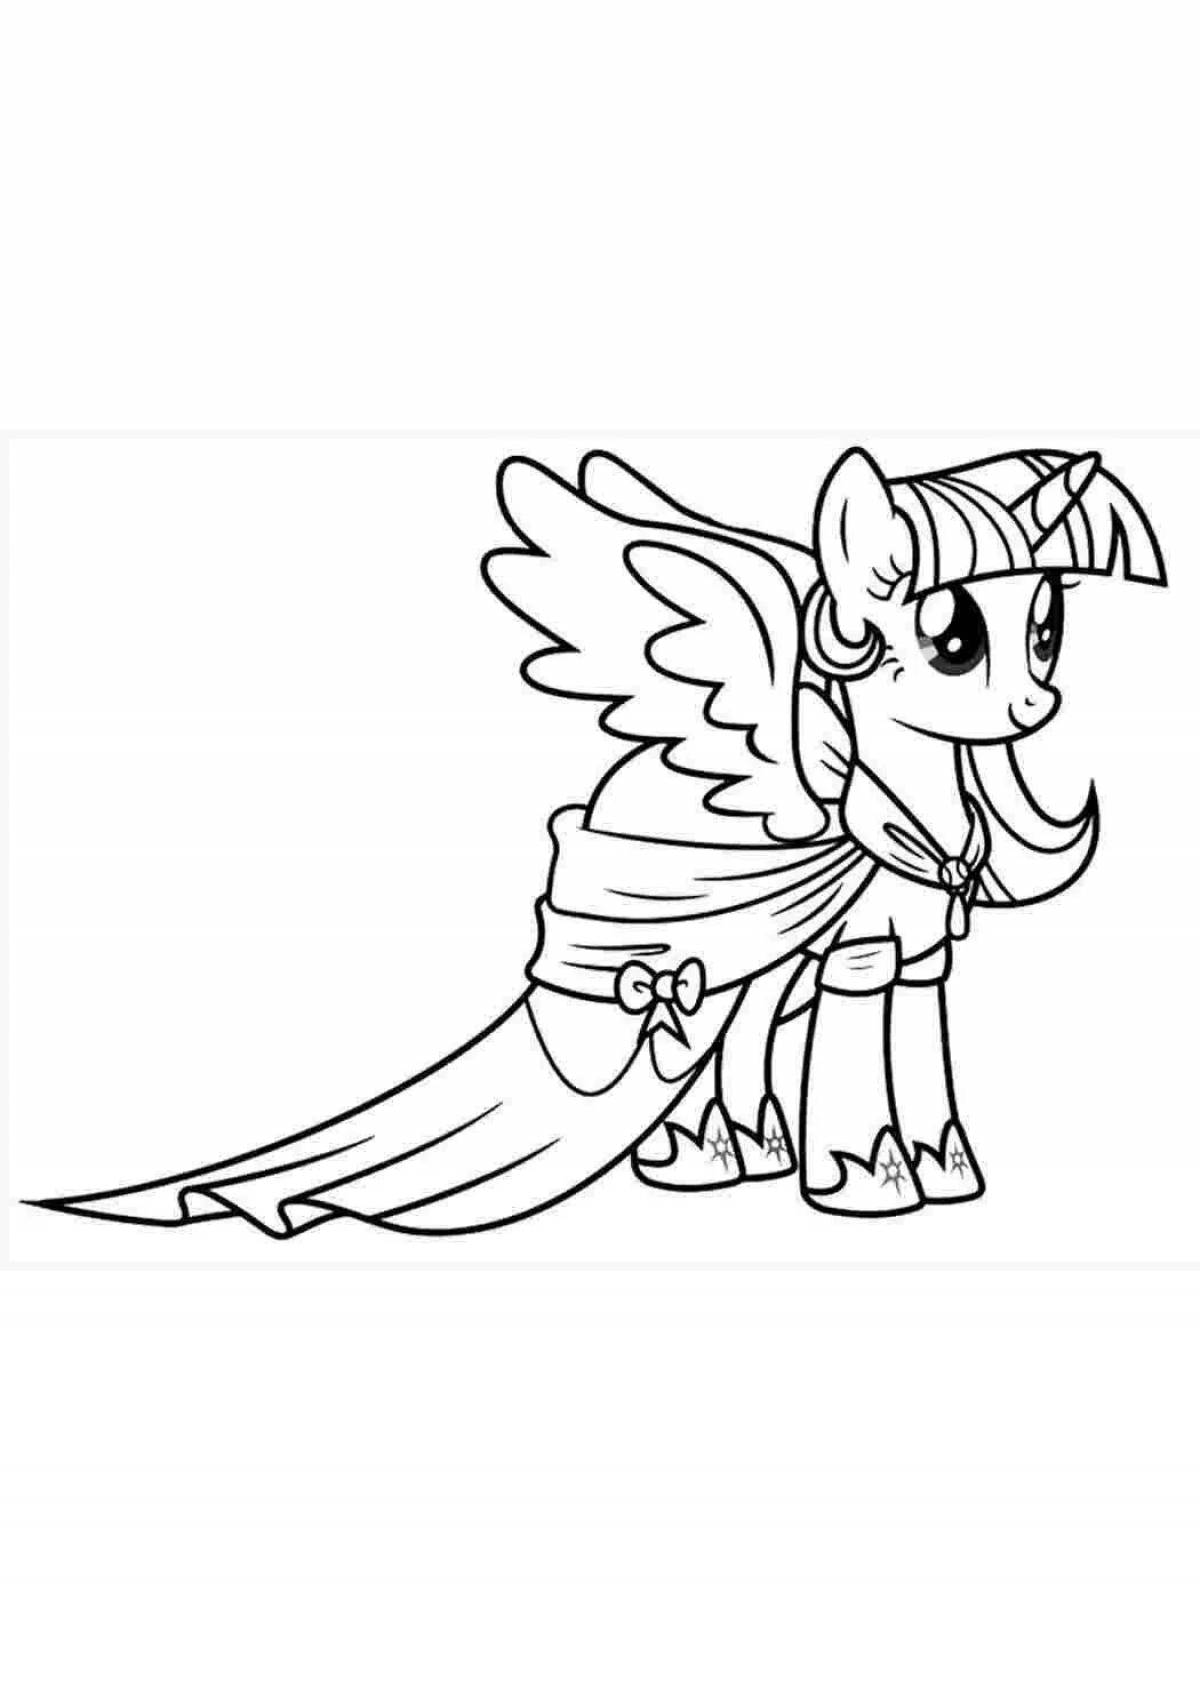 Delightful pony coloring with wings